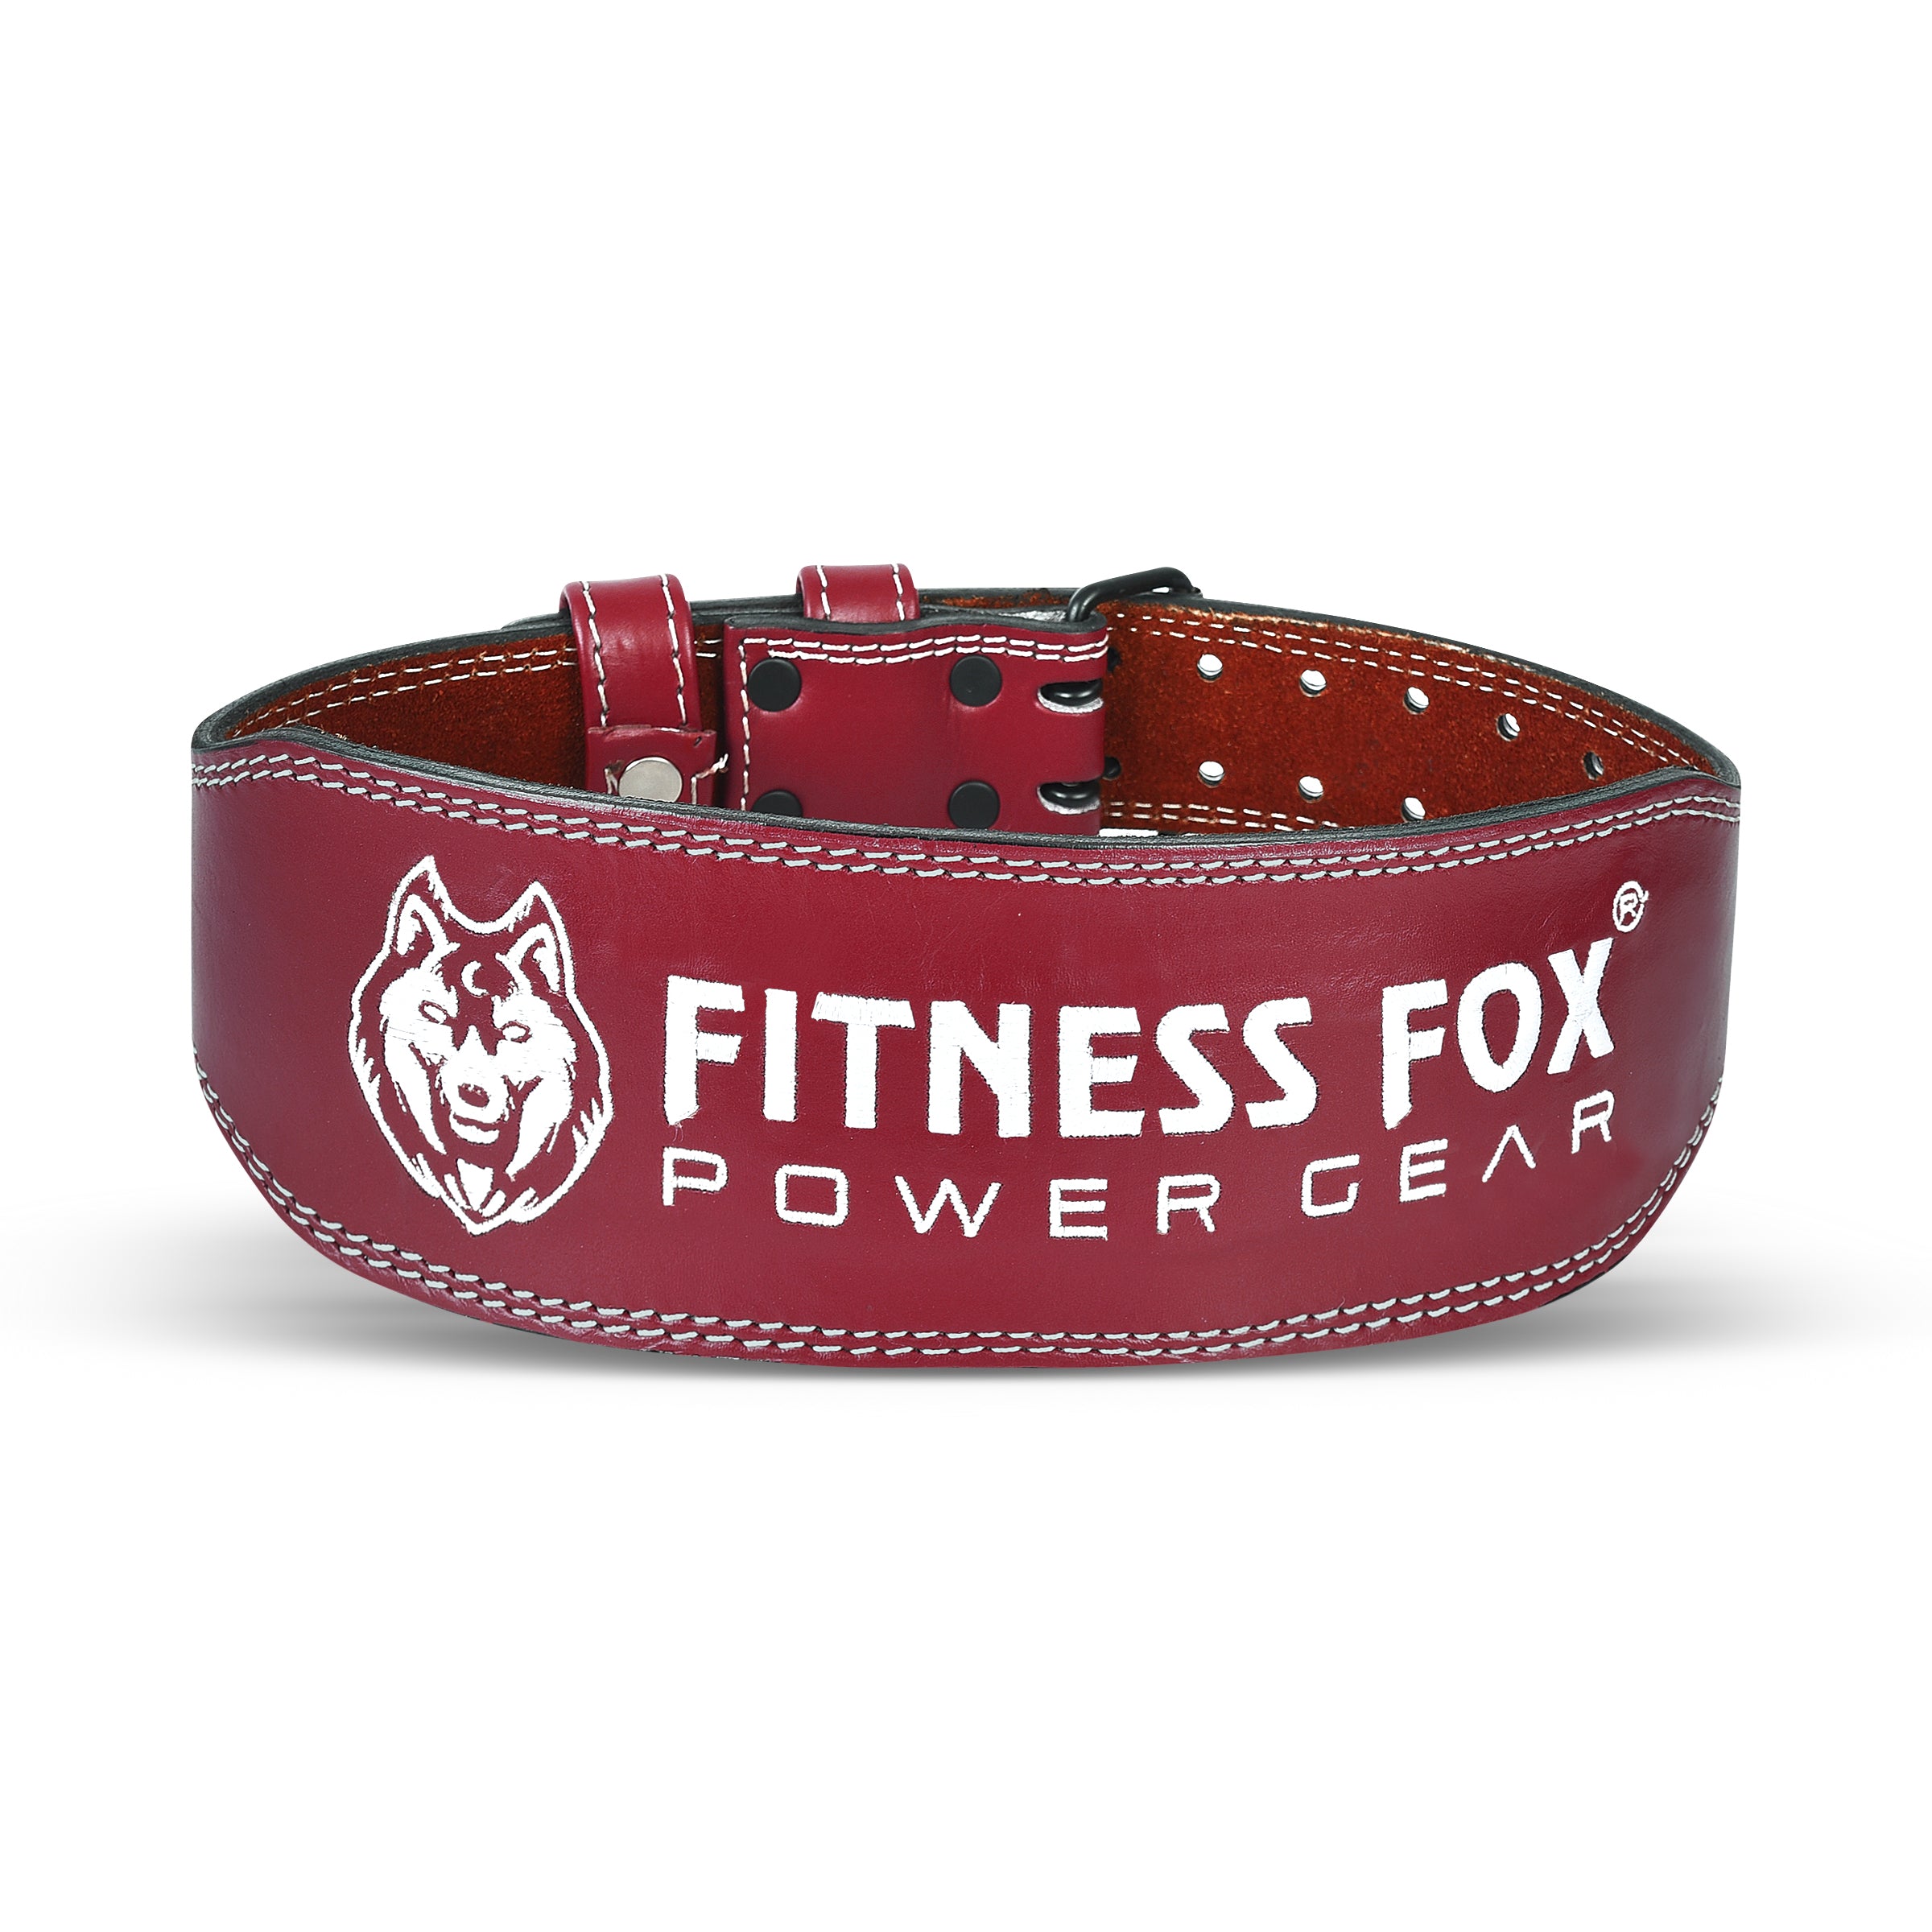 FitnessFox 4" Wine Weightlifting Leather Belt